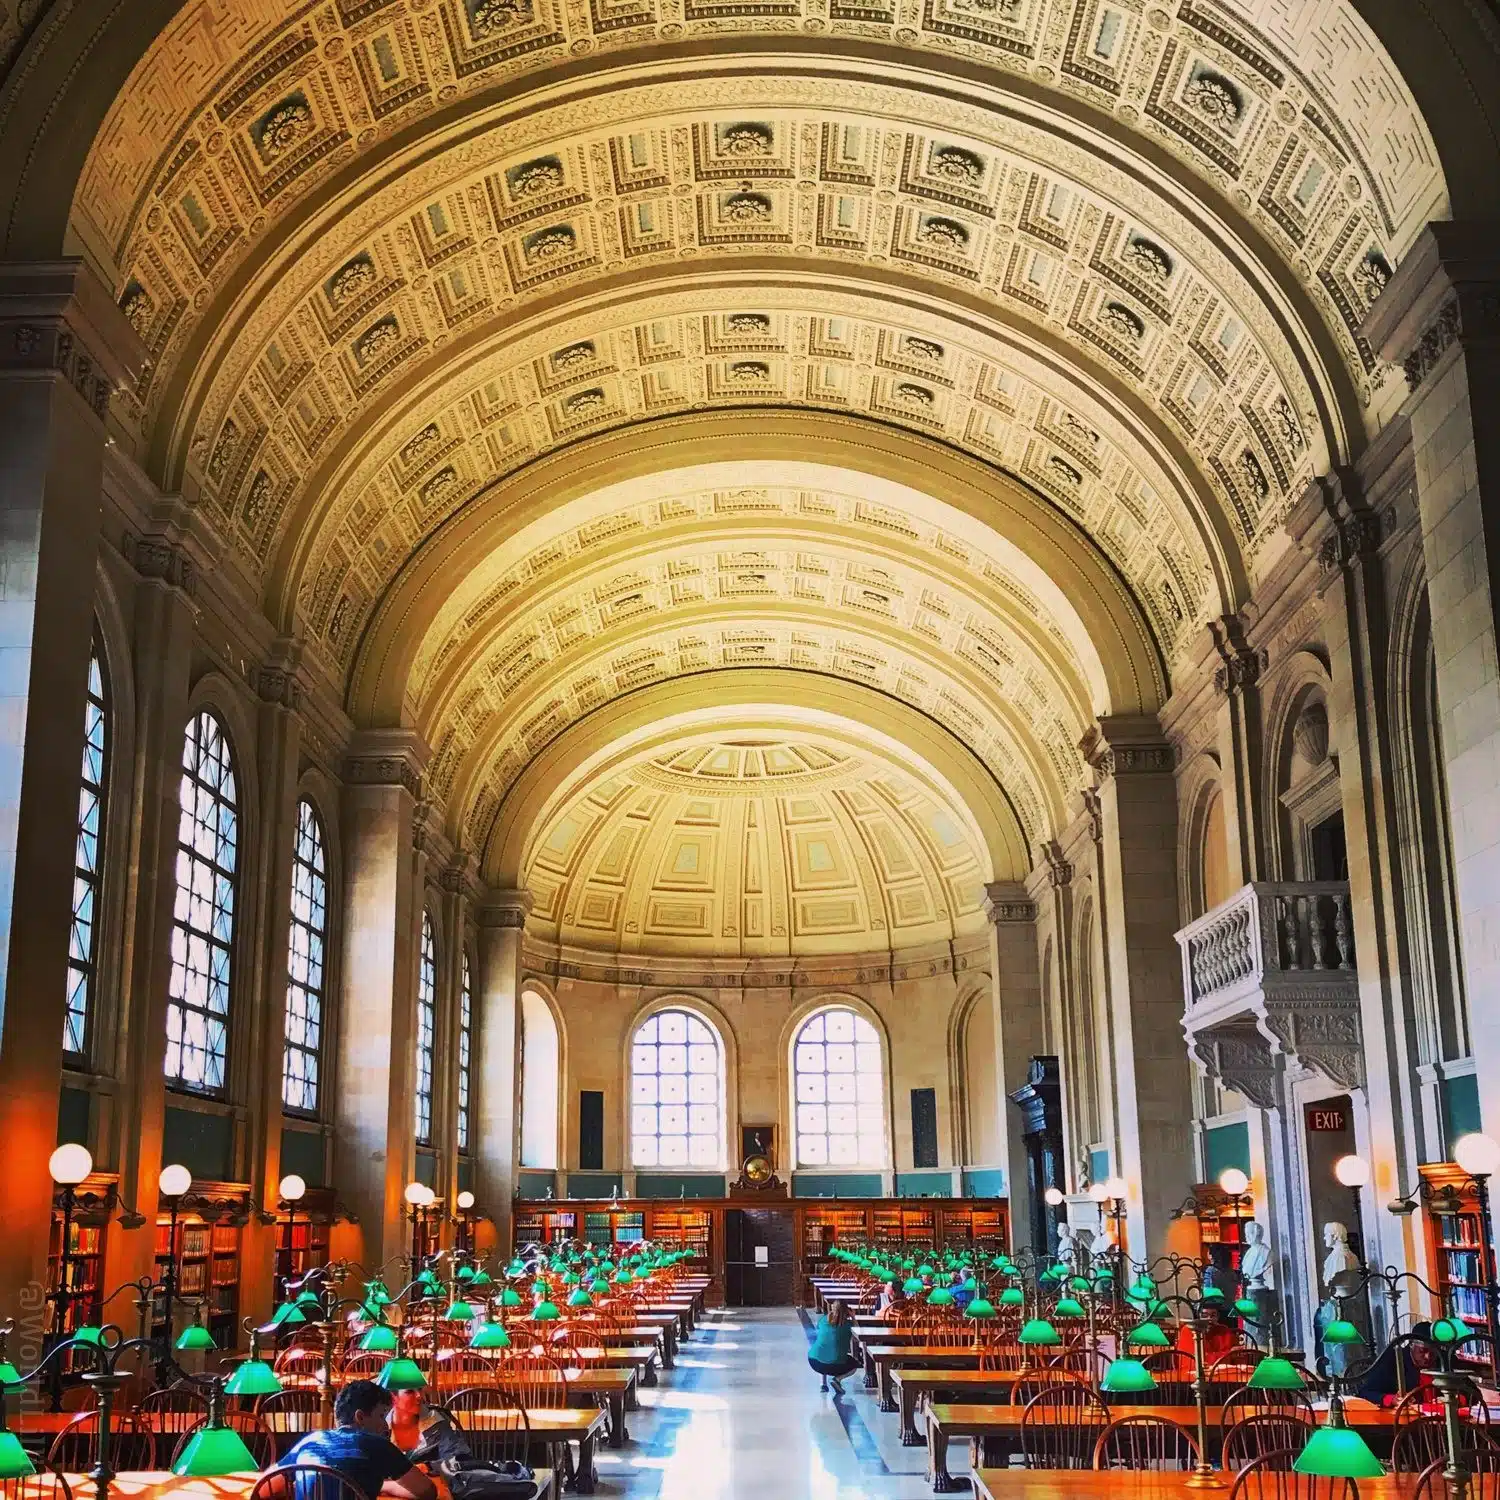 The beautiful Boston Public Library, not far from our school.